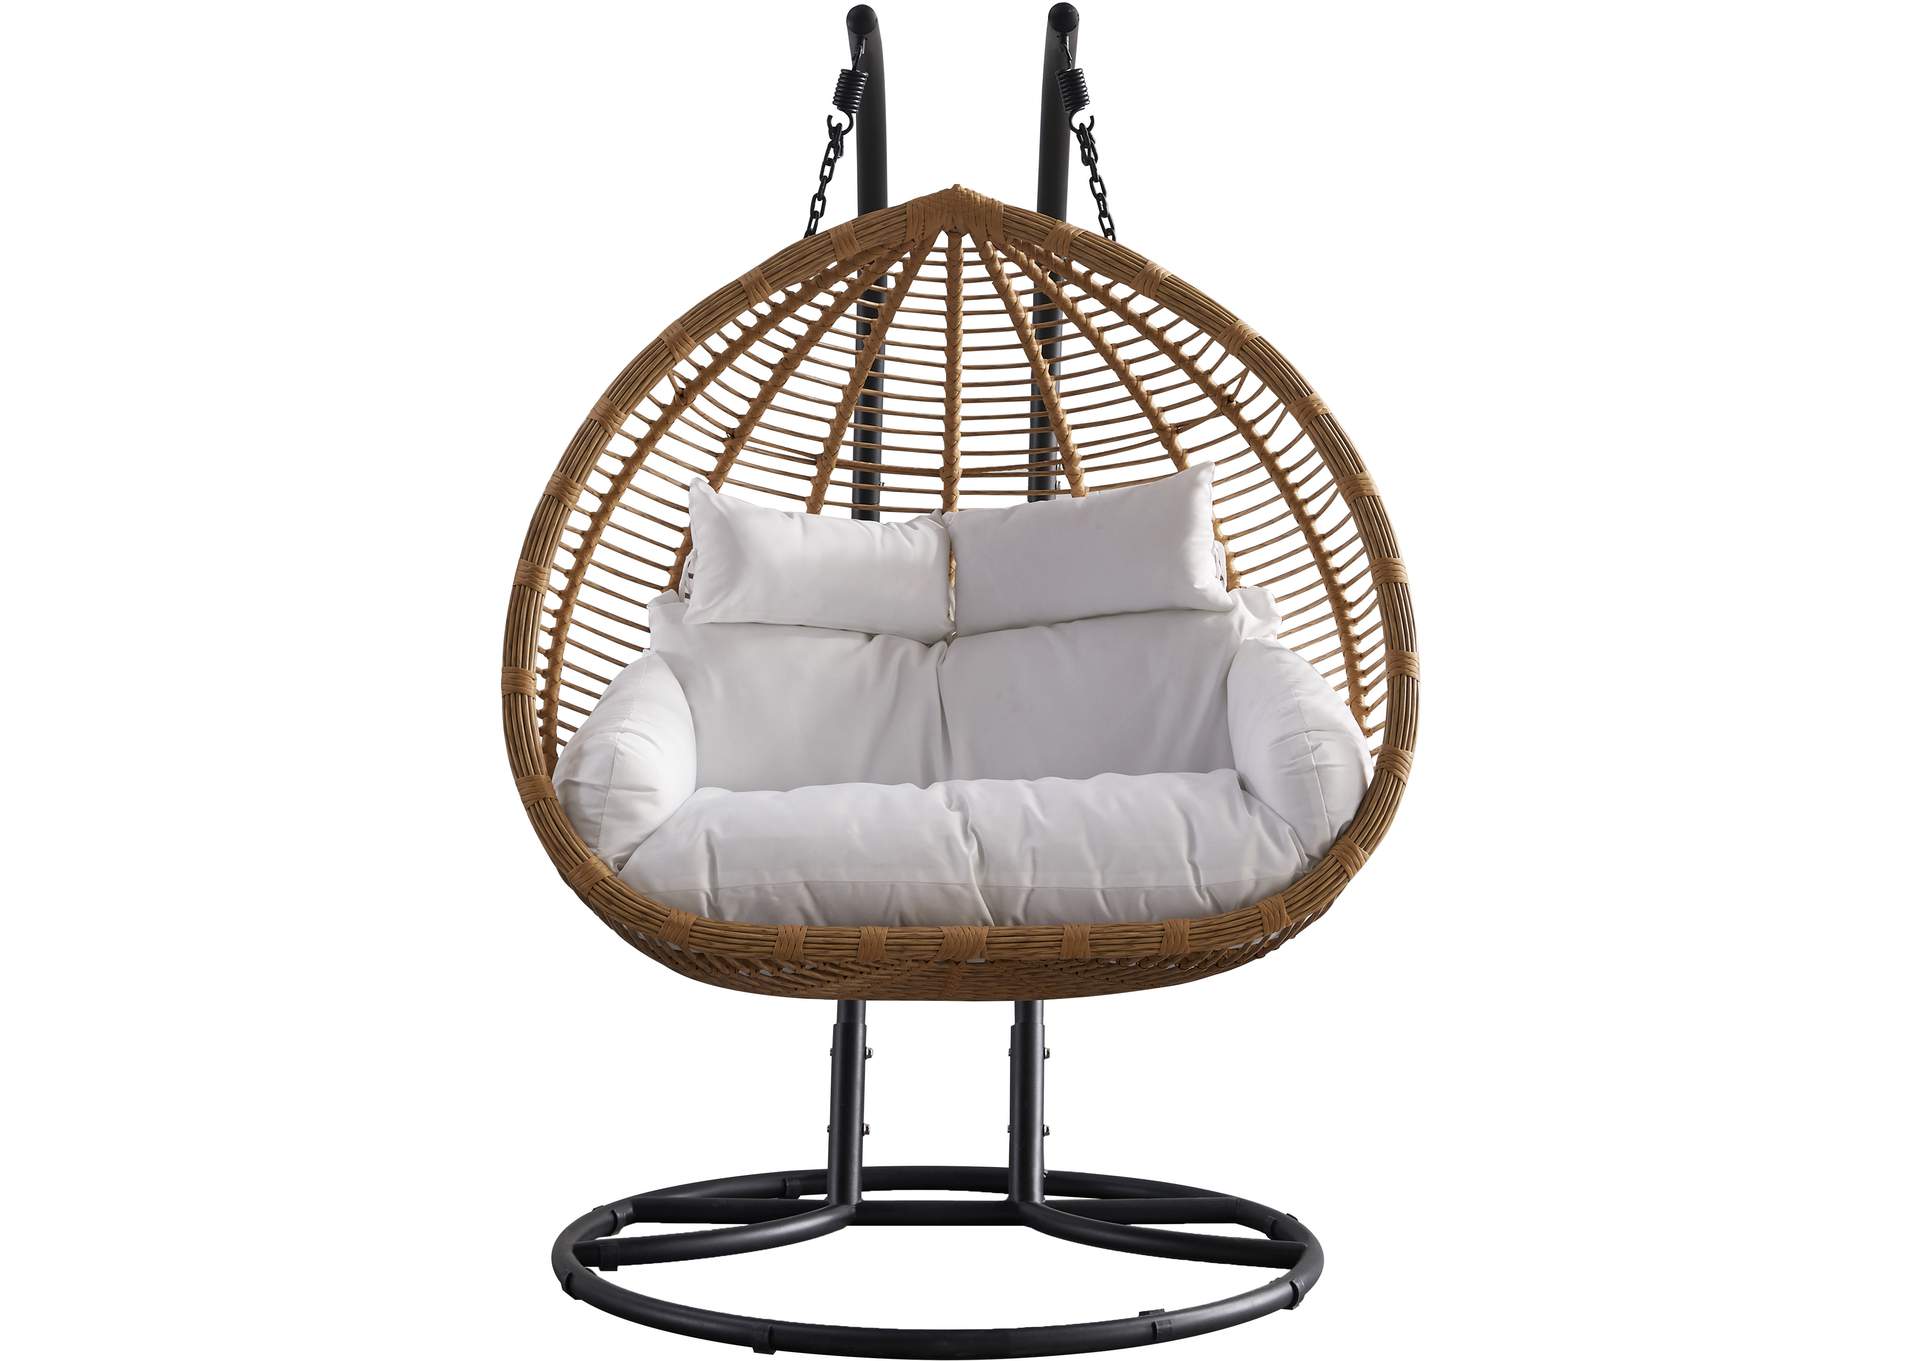 Tarzan Natural Color Outdoor Patio Double Swing Chair,Meridian Furniture